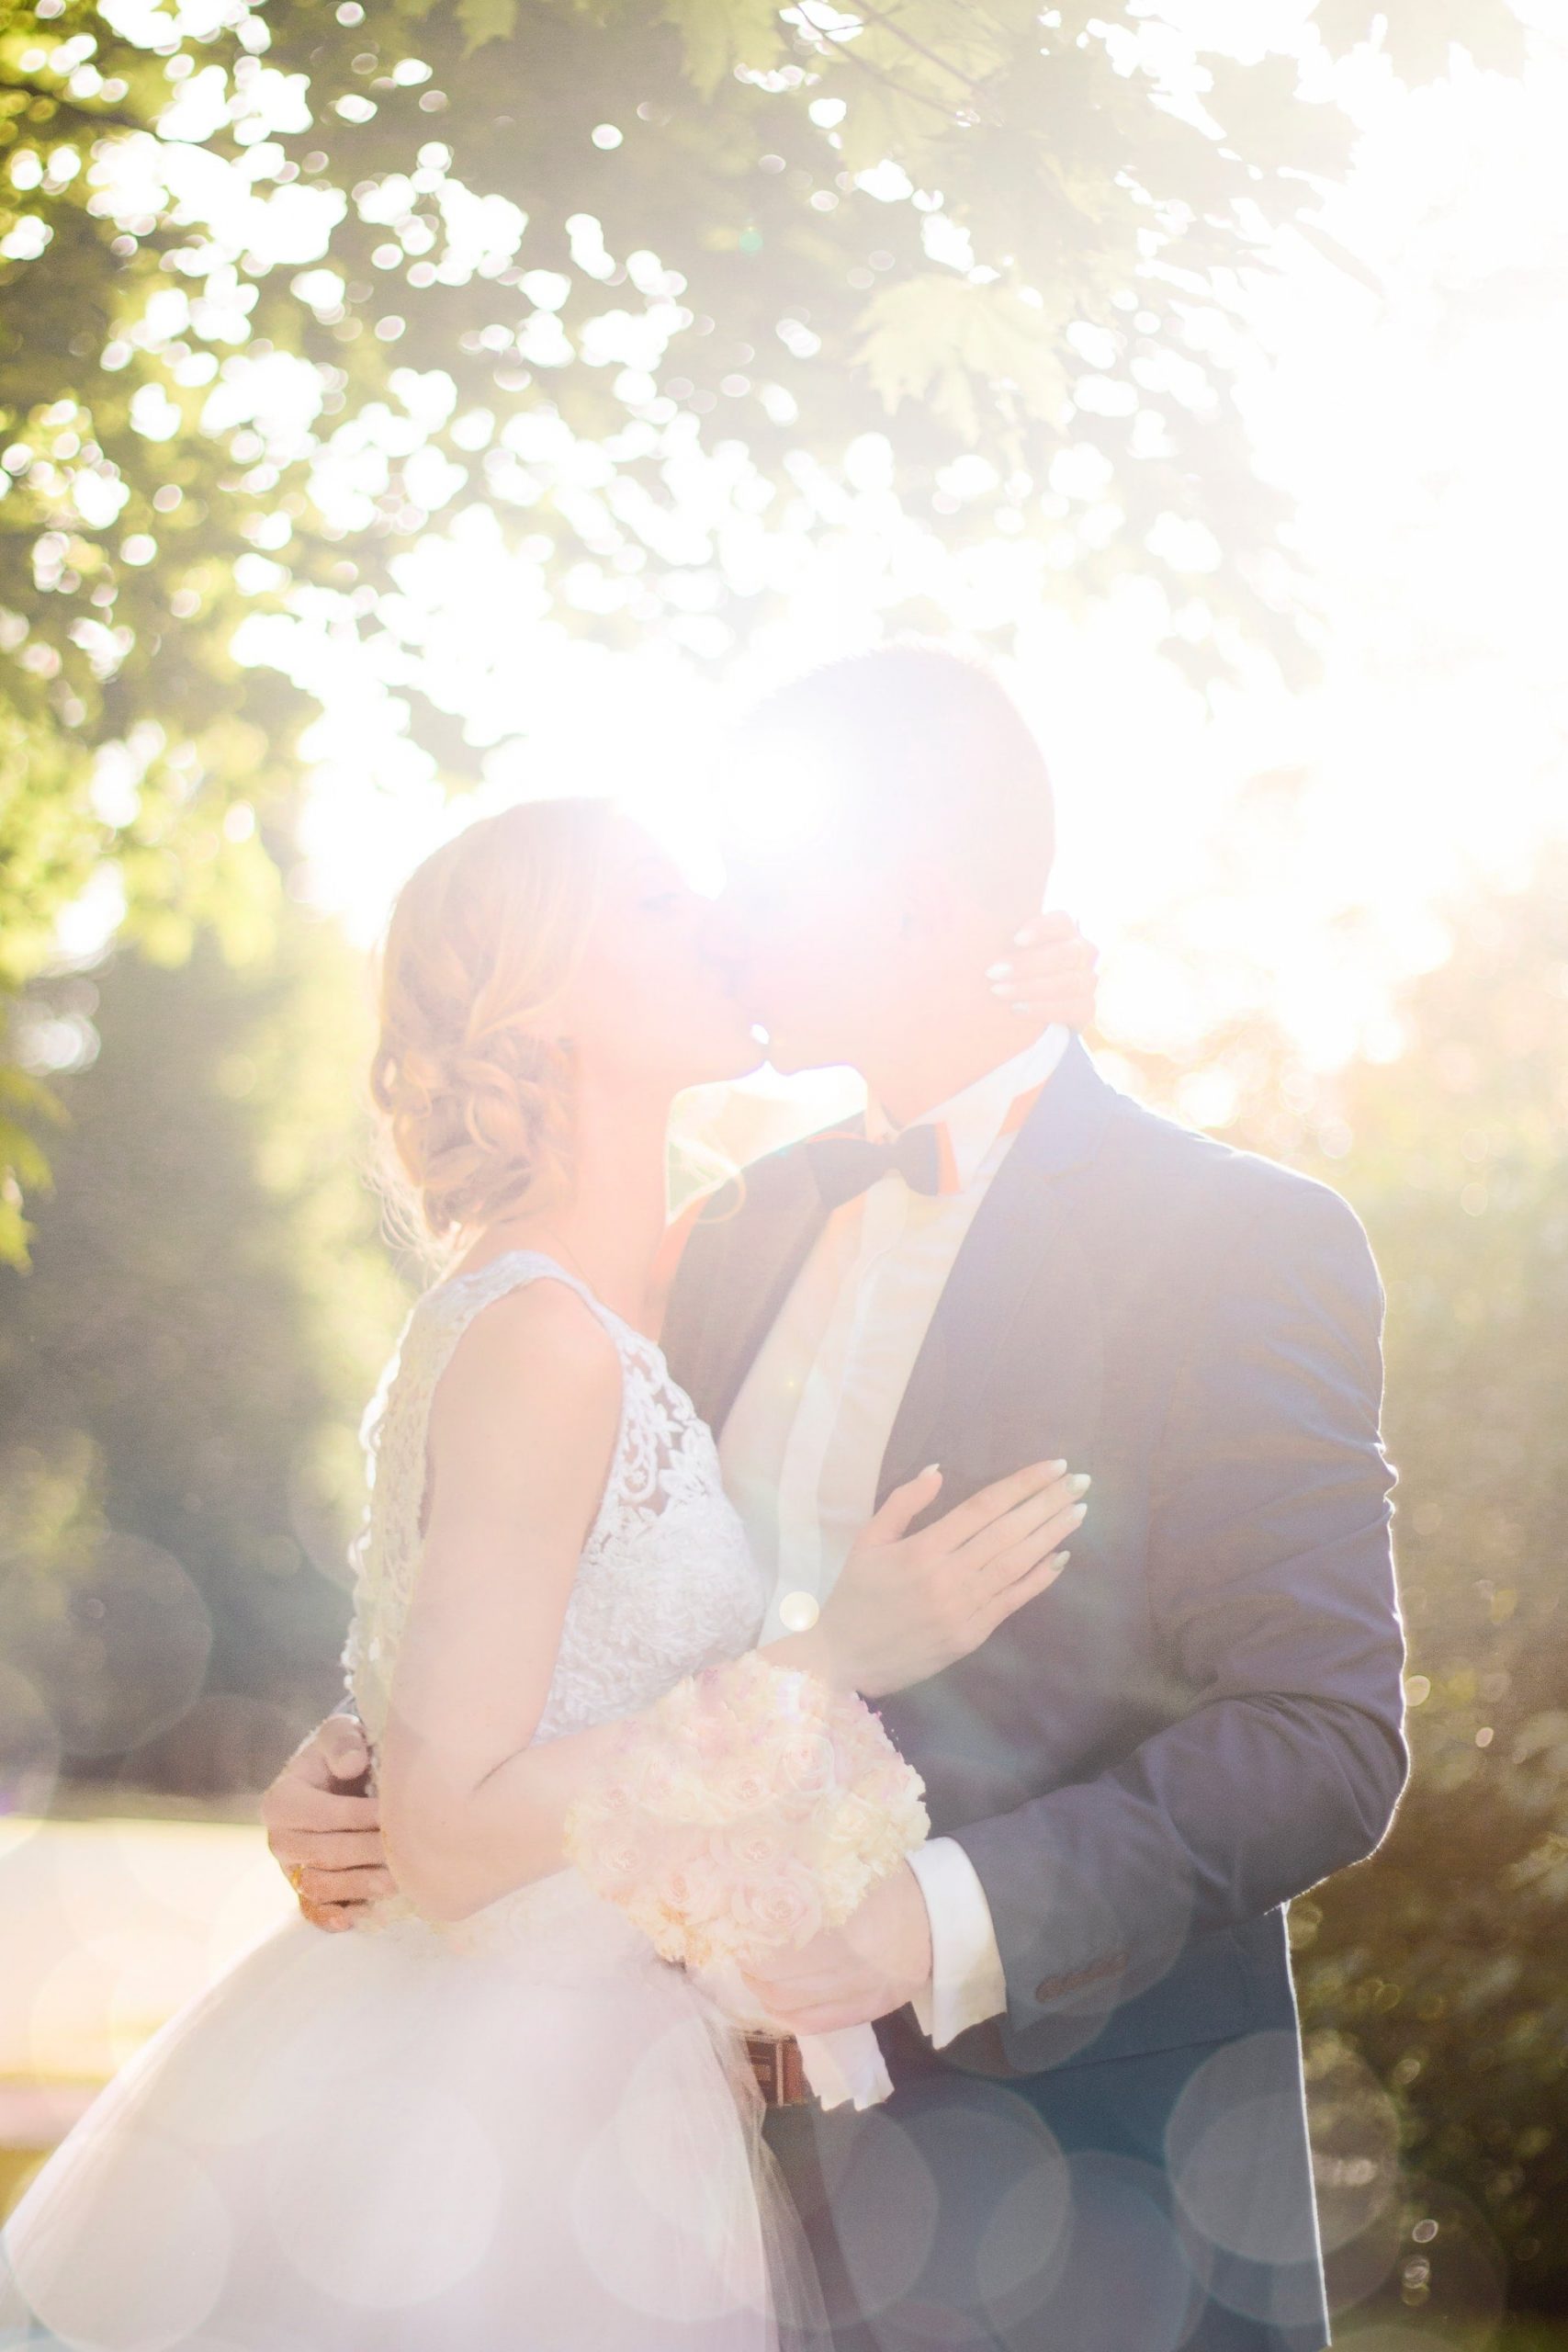 Newly Wed Hugging & Kissing with Sun Exposure